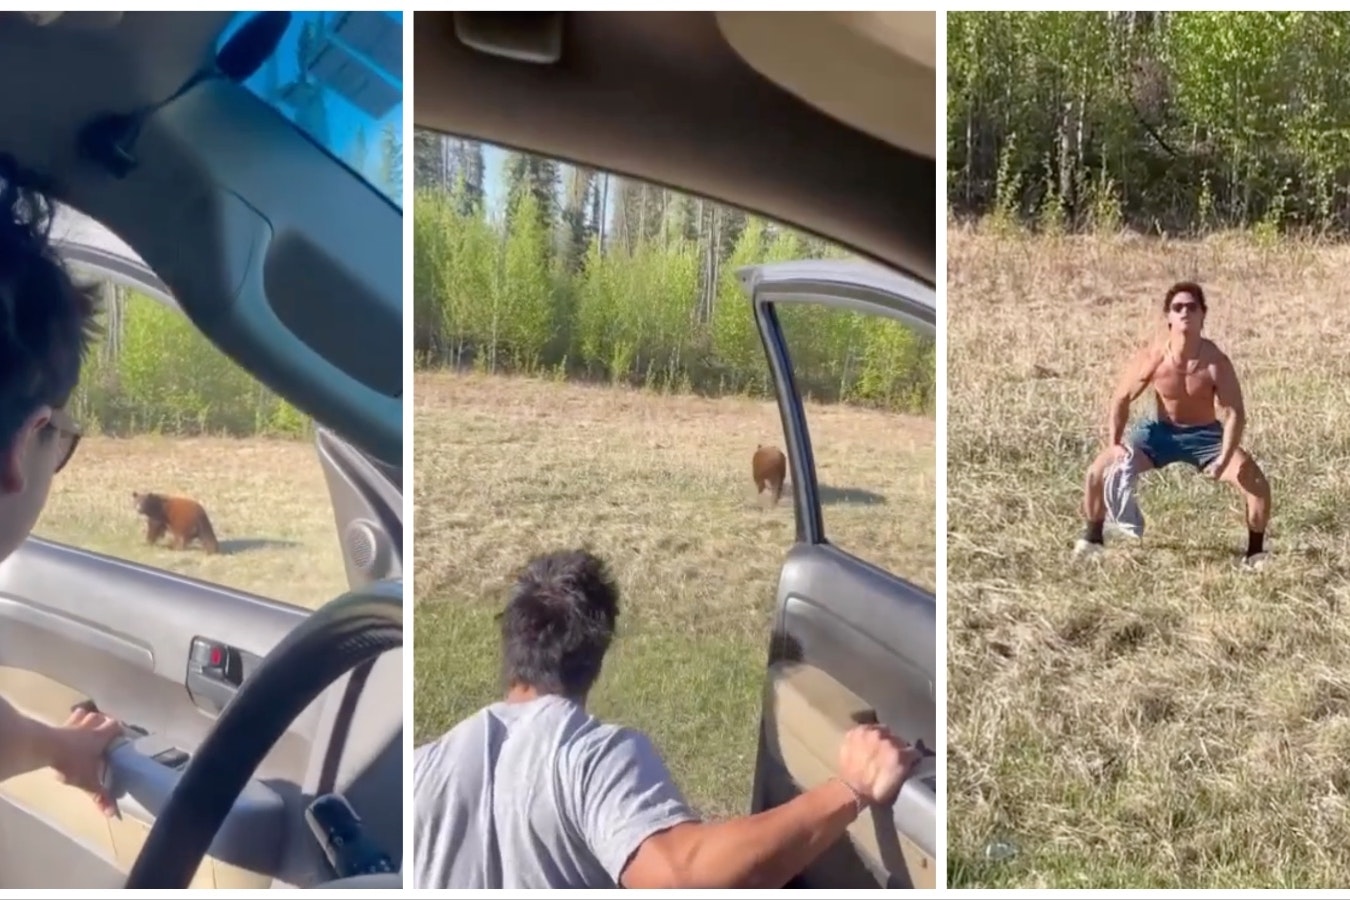 A series of images from a viral video shows a man get out of his vehicle when he spots a bear, then he yells at it as he charges the bear. The bewildered bruin ambles off into the brush, then the man celebrates.